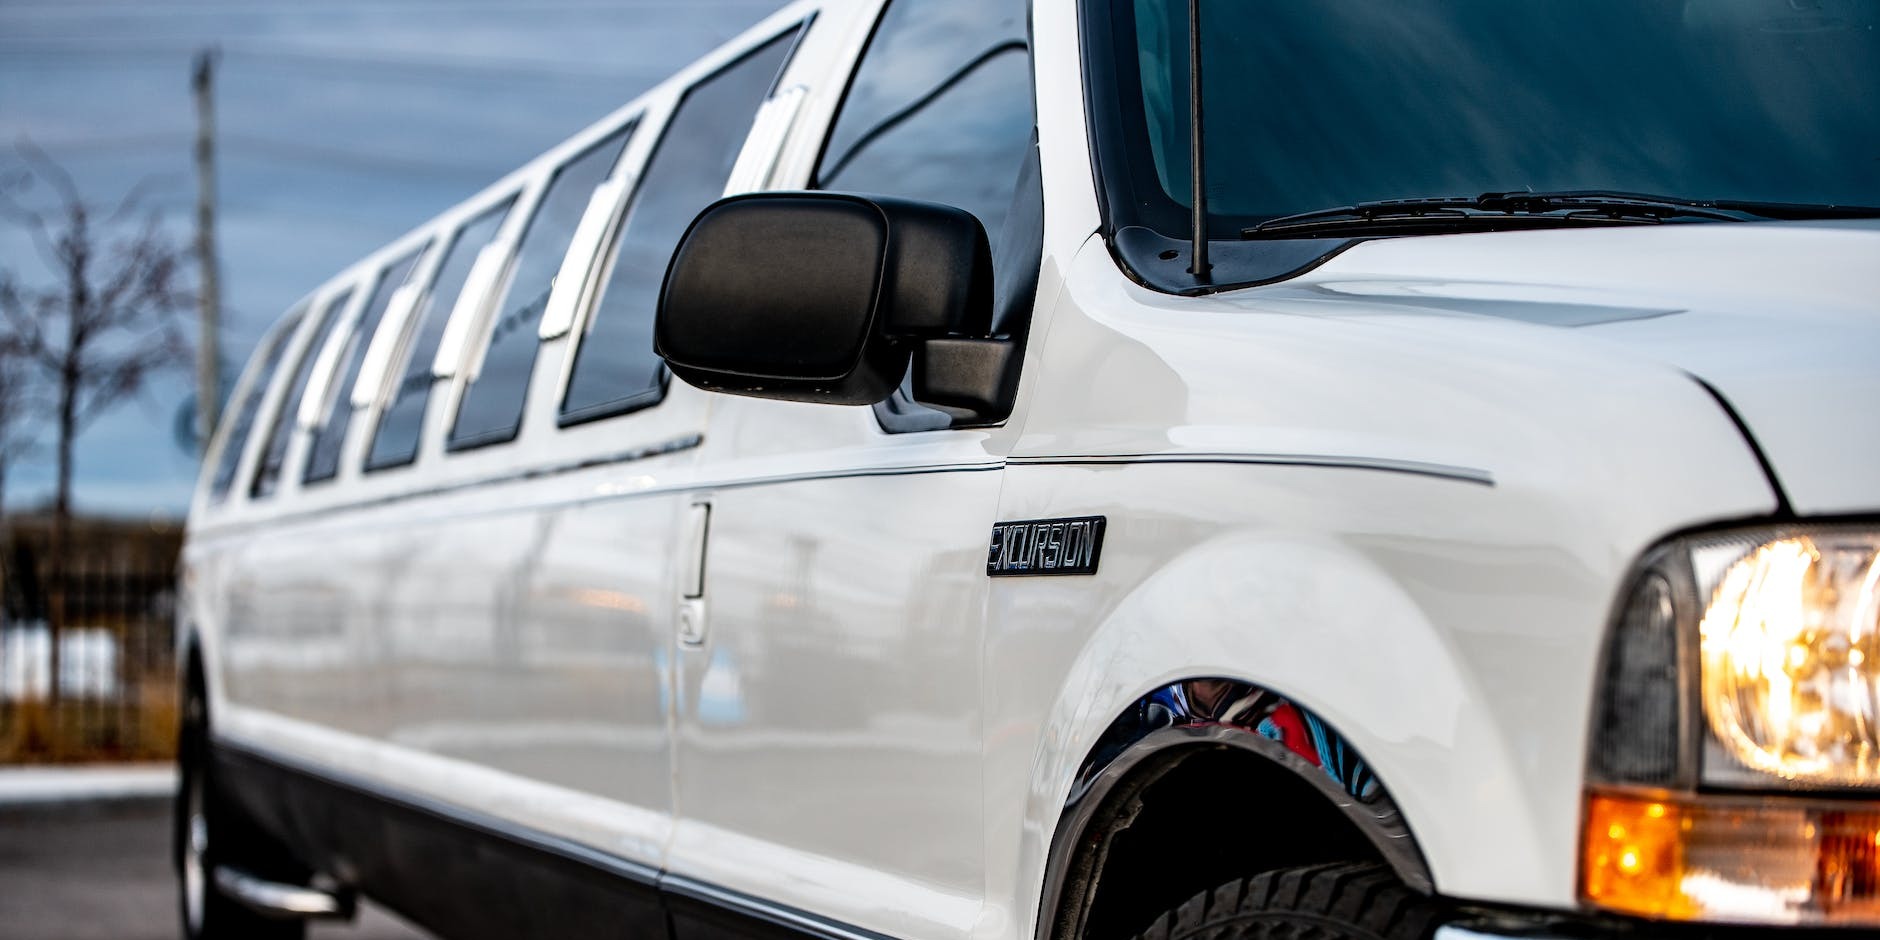 Limo Hire Etiquette: What You Need to Know for a Smooth Ride